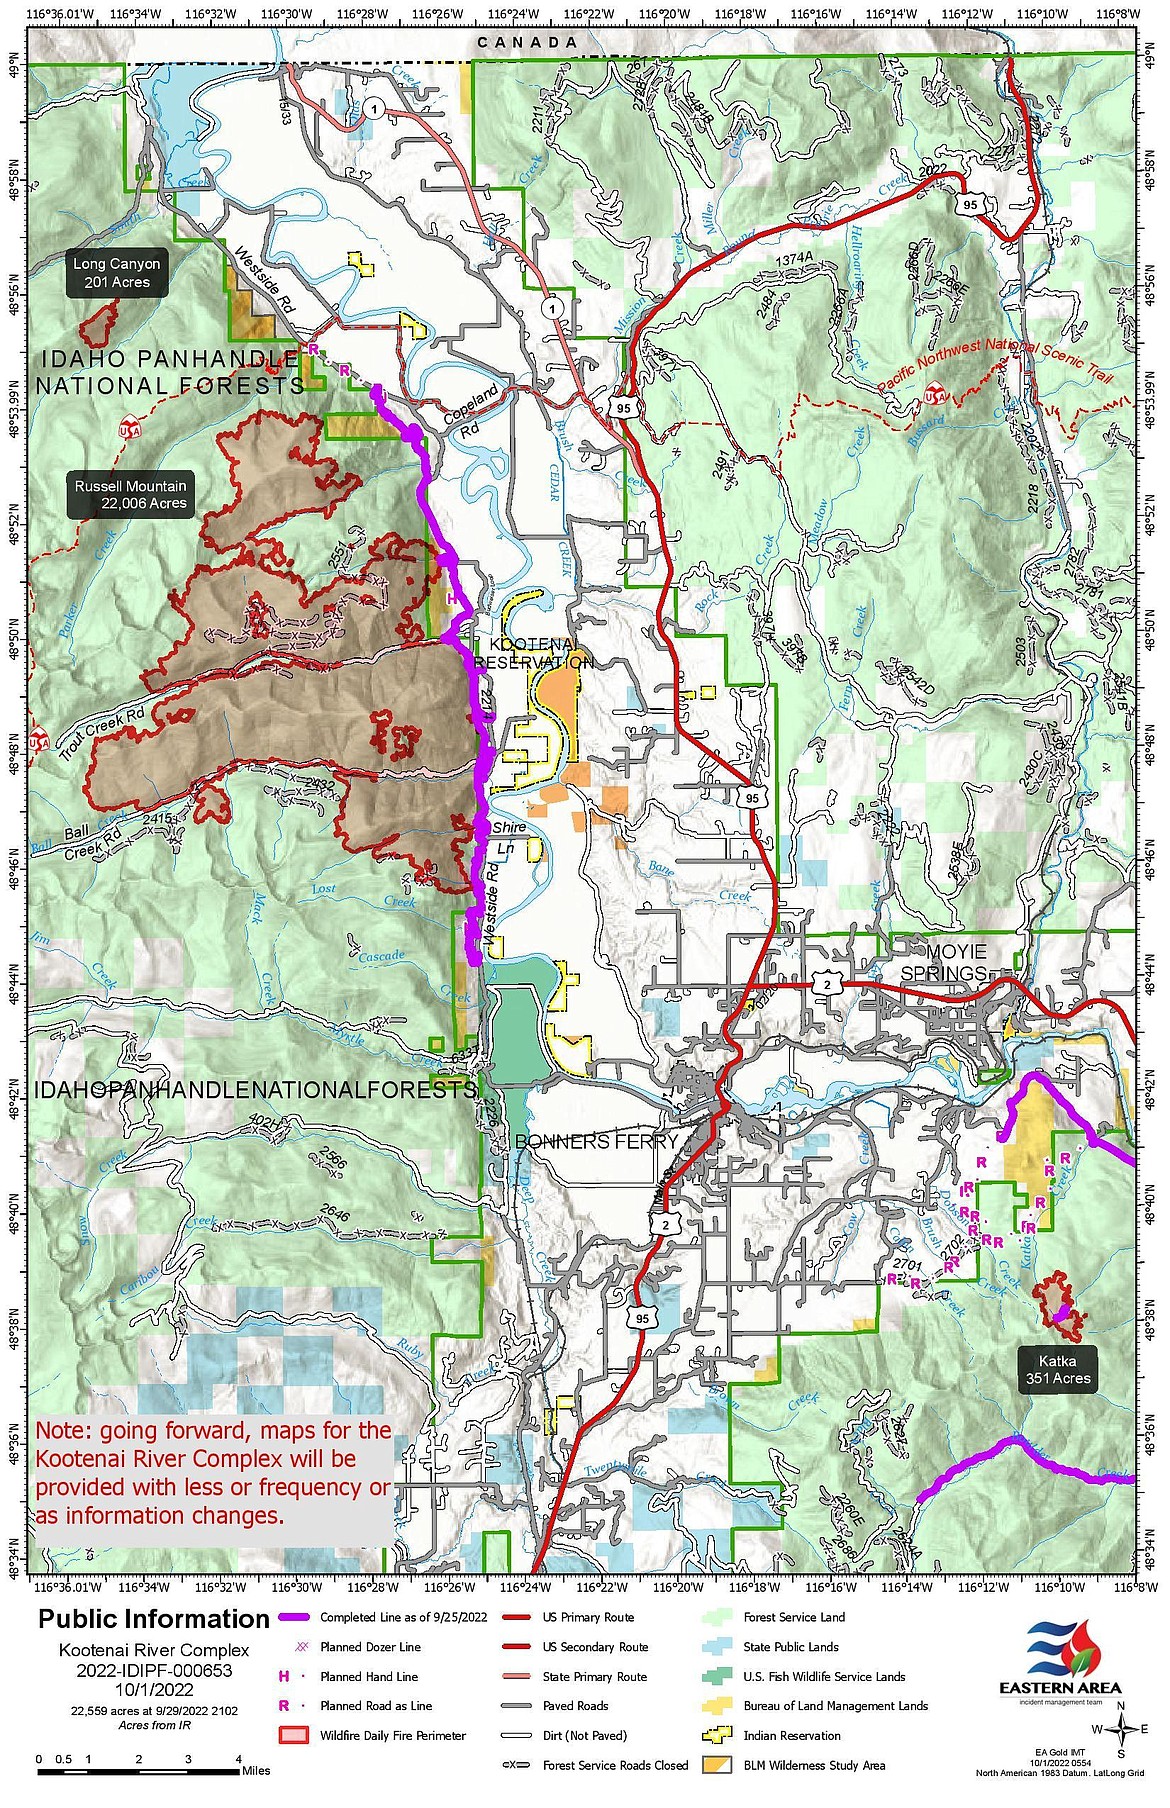 A map of the Kootenai River Complex fires.